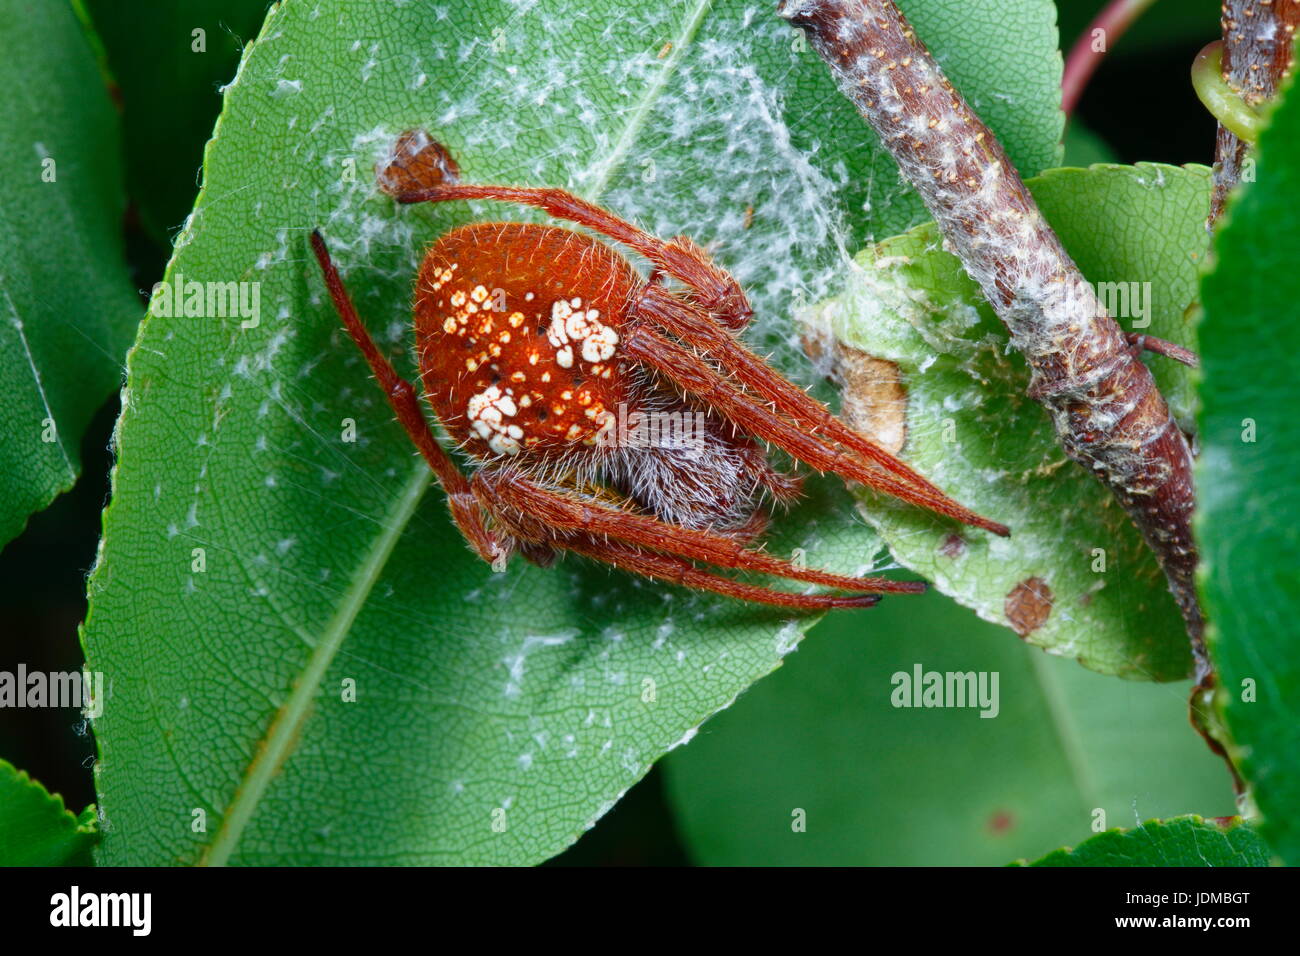 A tropical orb weaver spider, Eriophora ravilla, on a leaf. Stock Photo